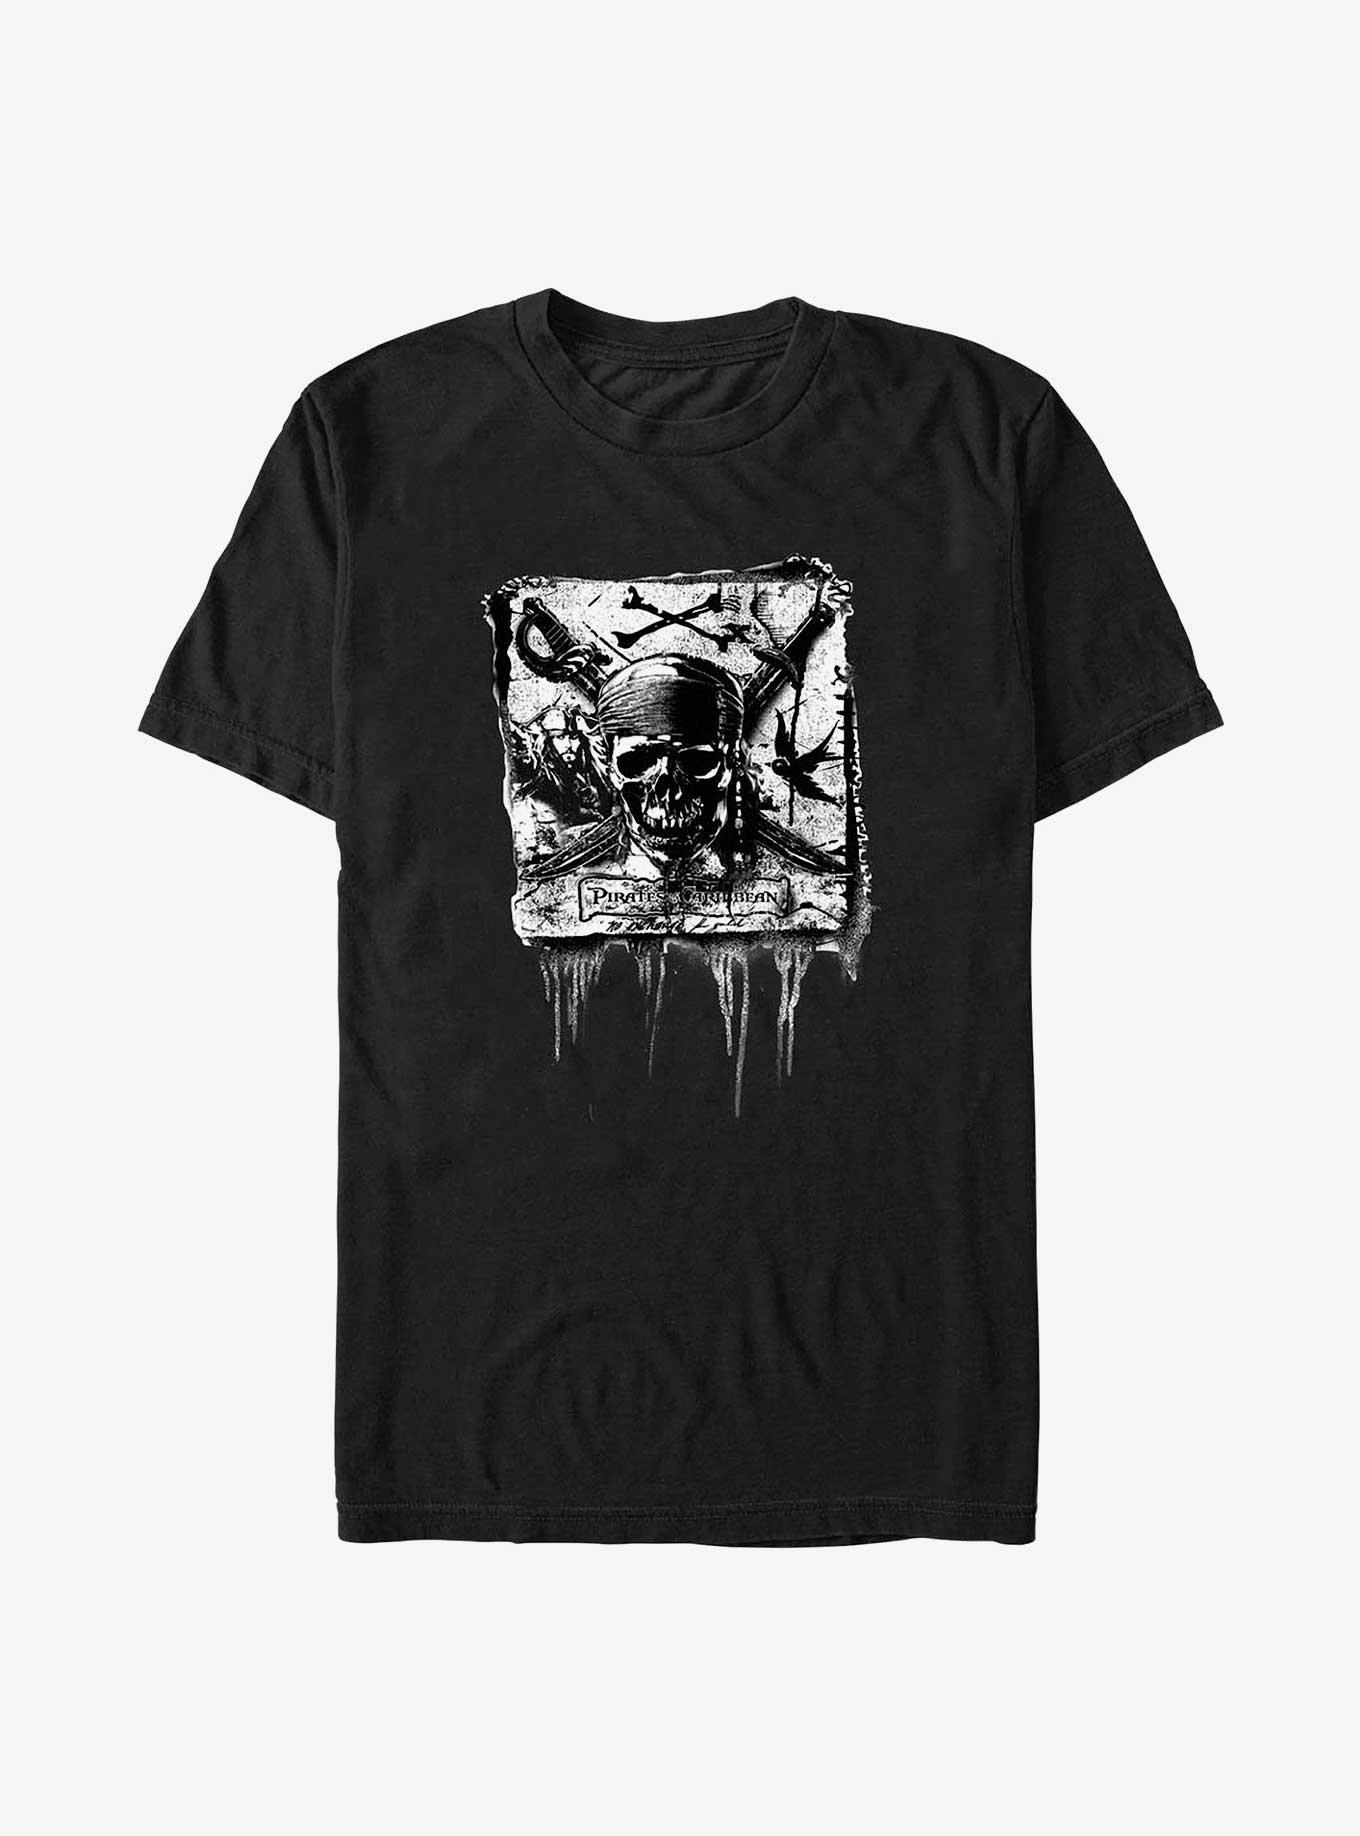 Disney - Pirates of the Caribbean Graphic T-Shirt